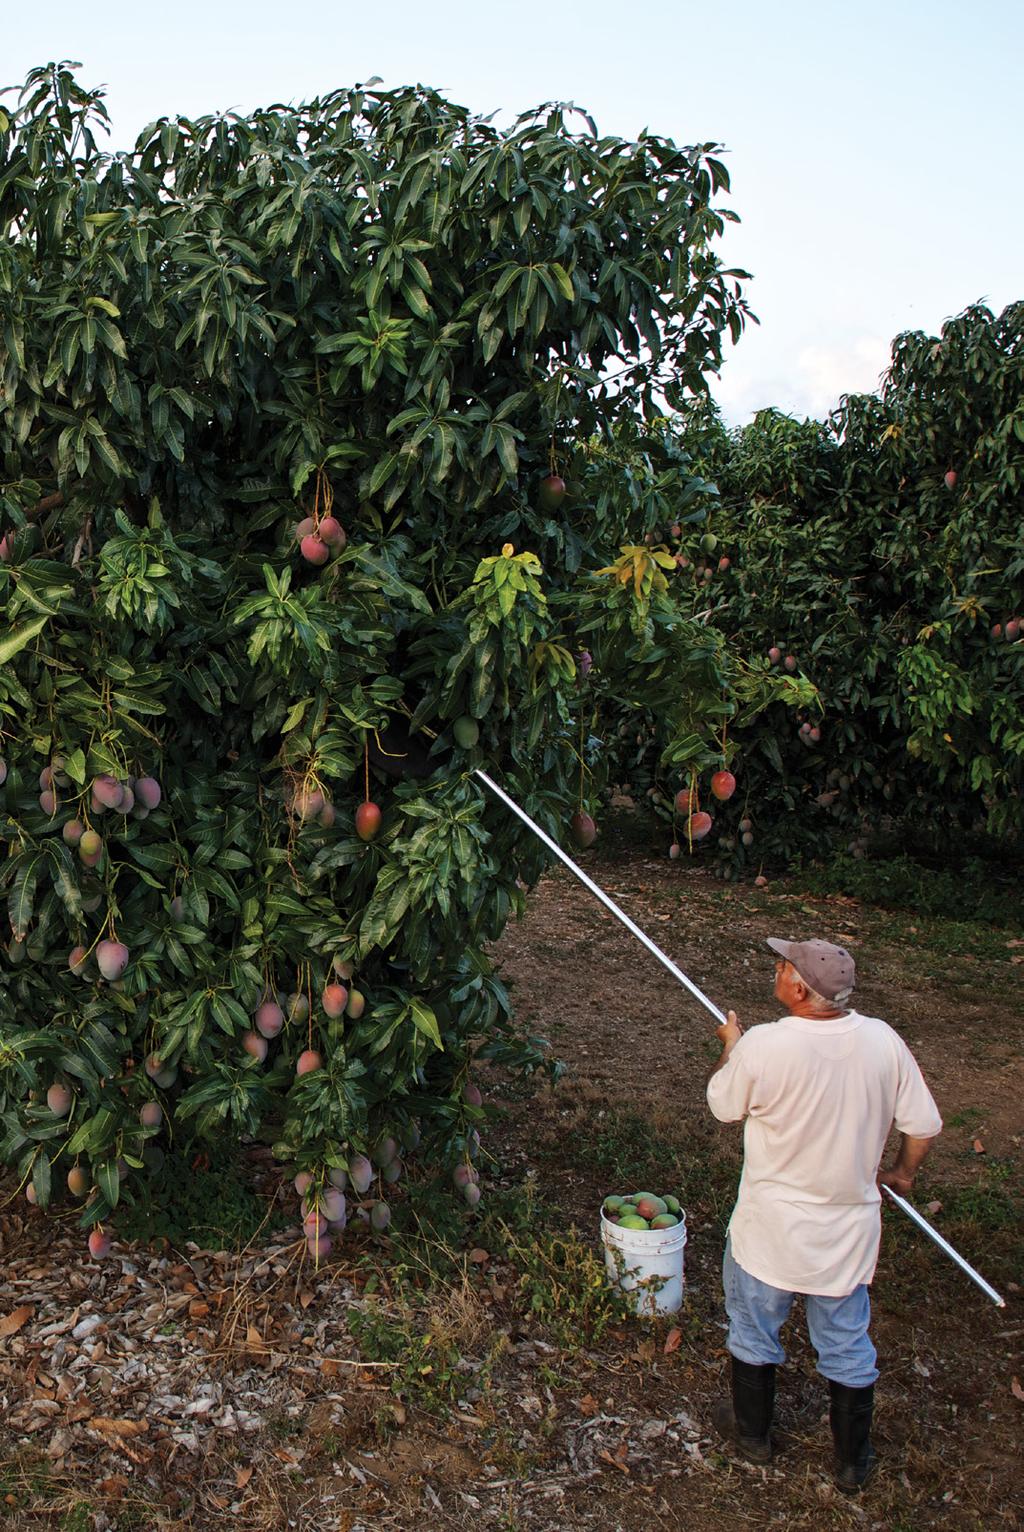 Mangos, Harvested Year Round Although Puerto Rico s back yard trees may adhere to the standard April through August harvest season, Martex Farms harvests mangos year-round thanks to innovative